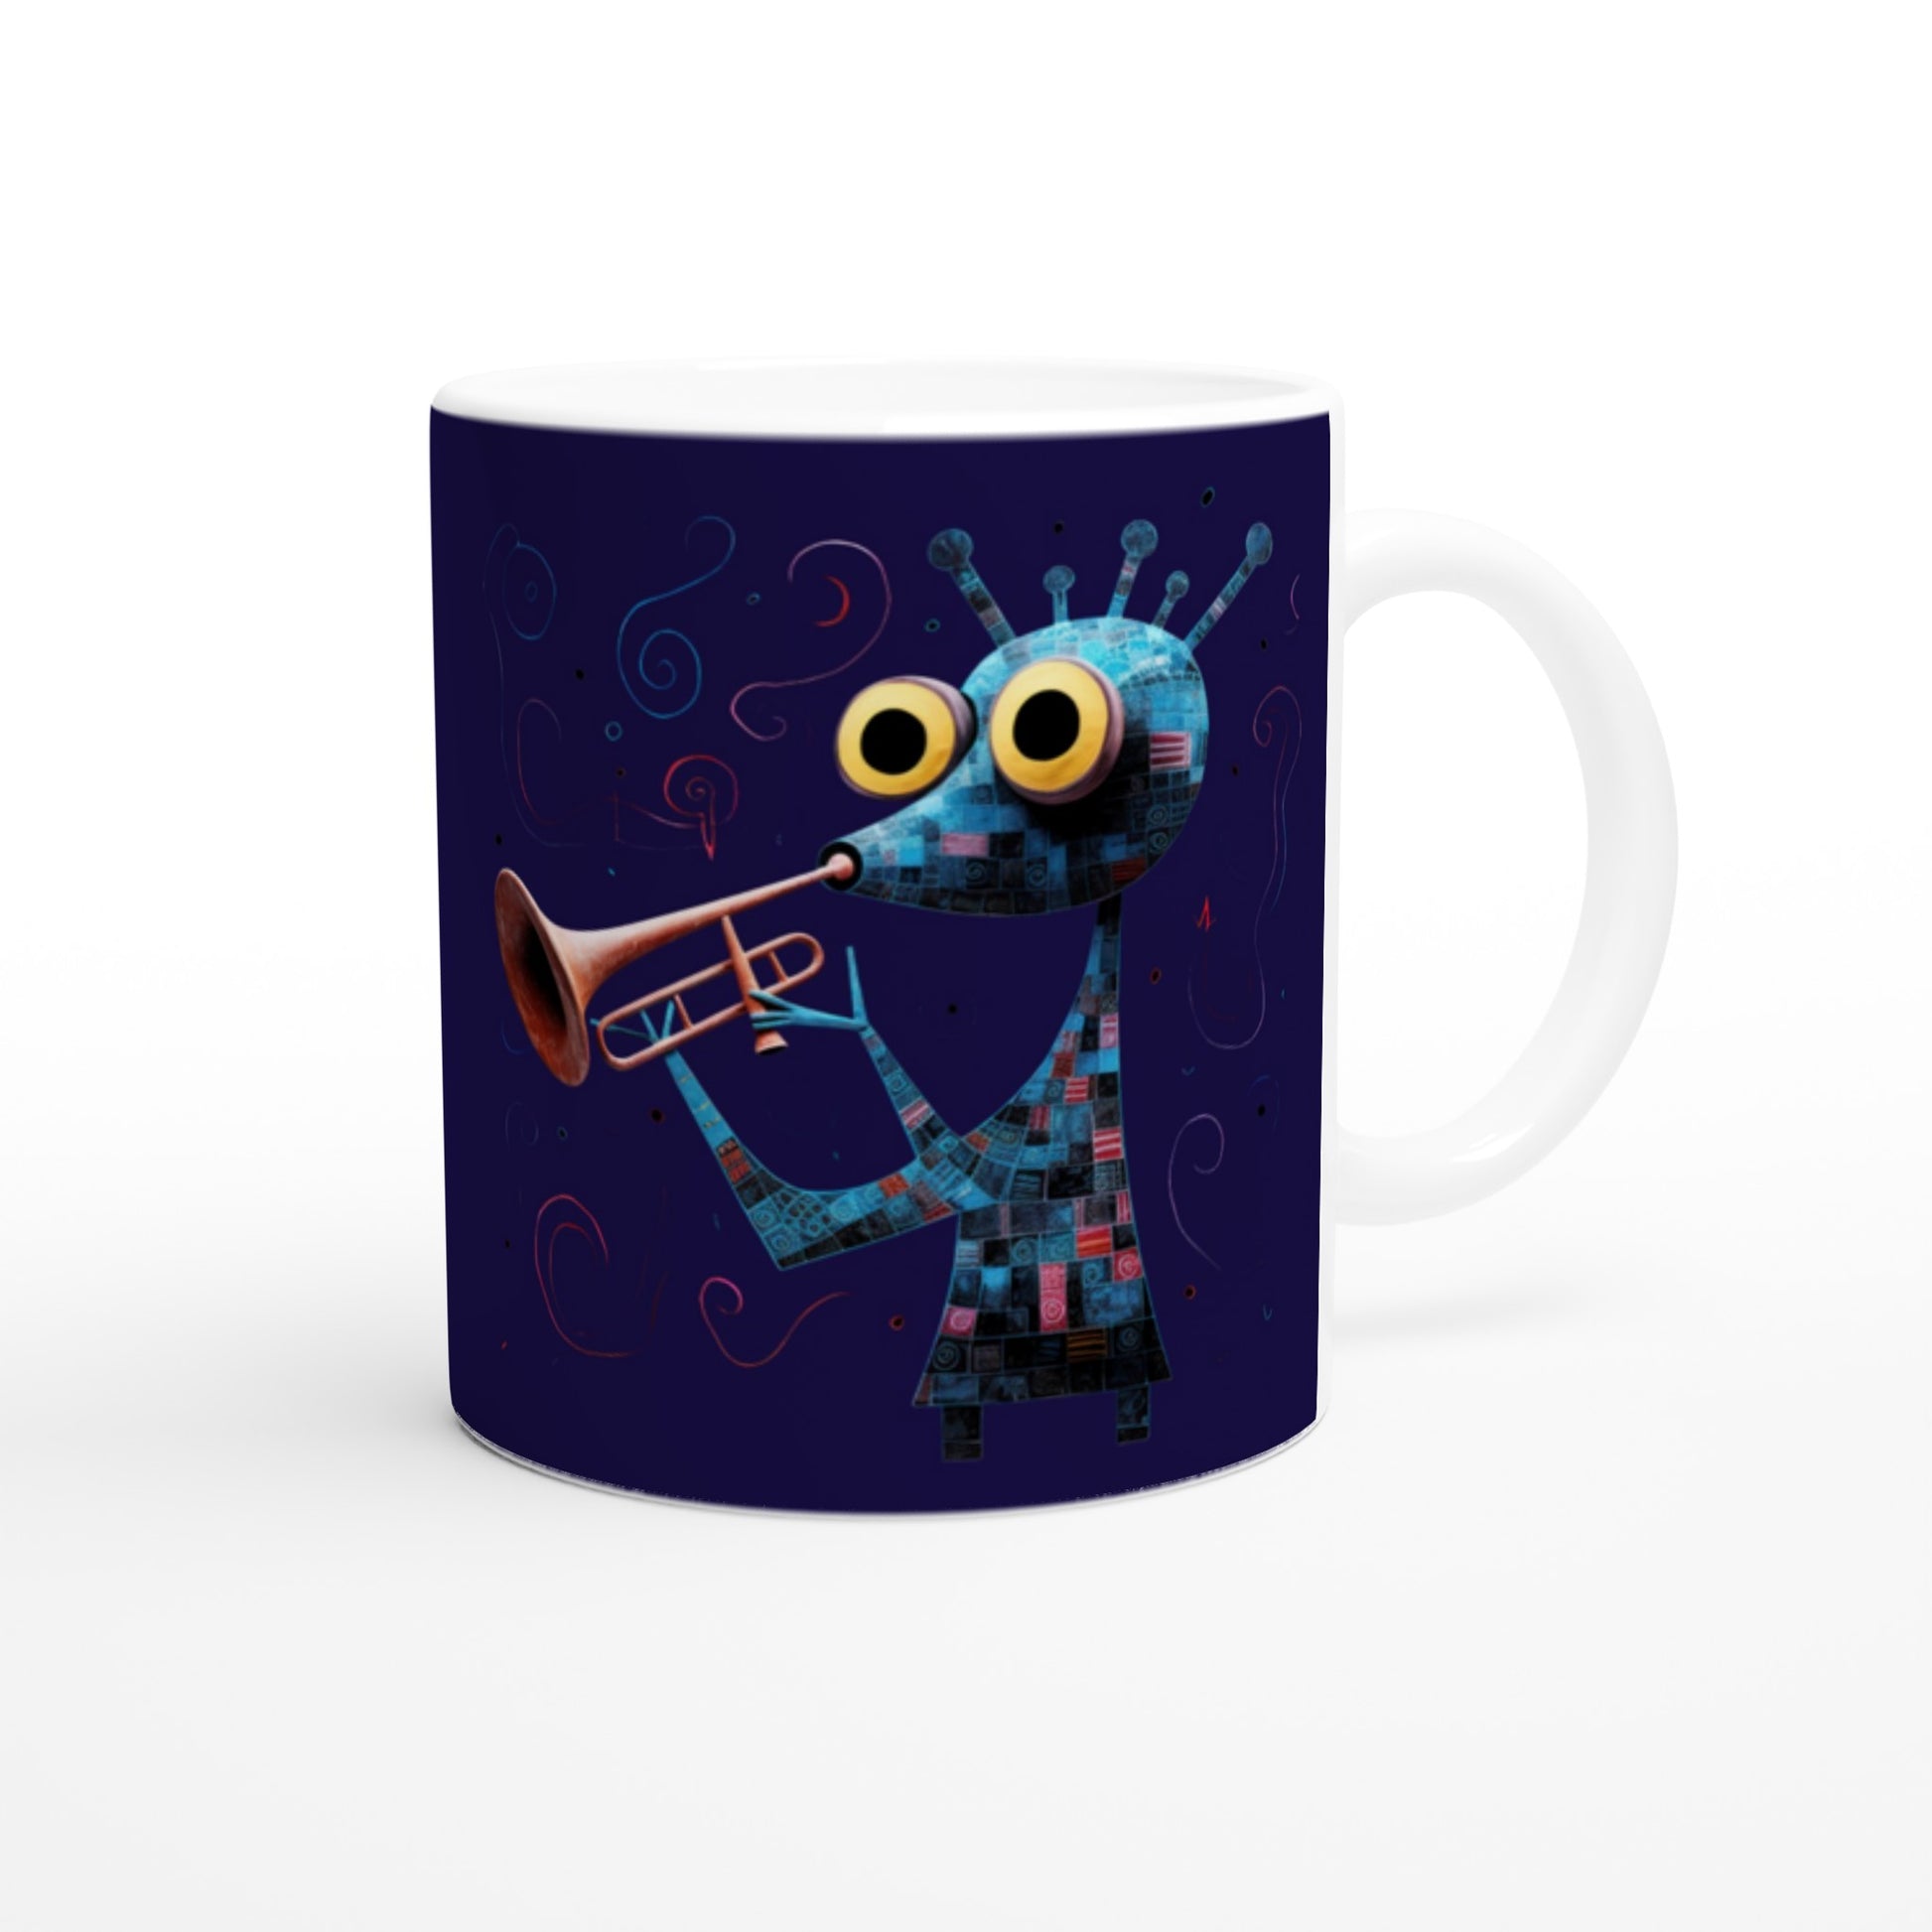 abstract trumpeter print on a navy blue mug